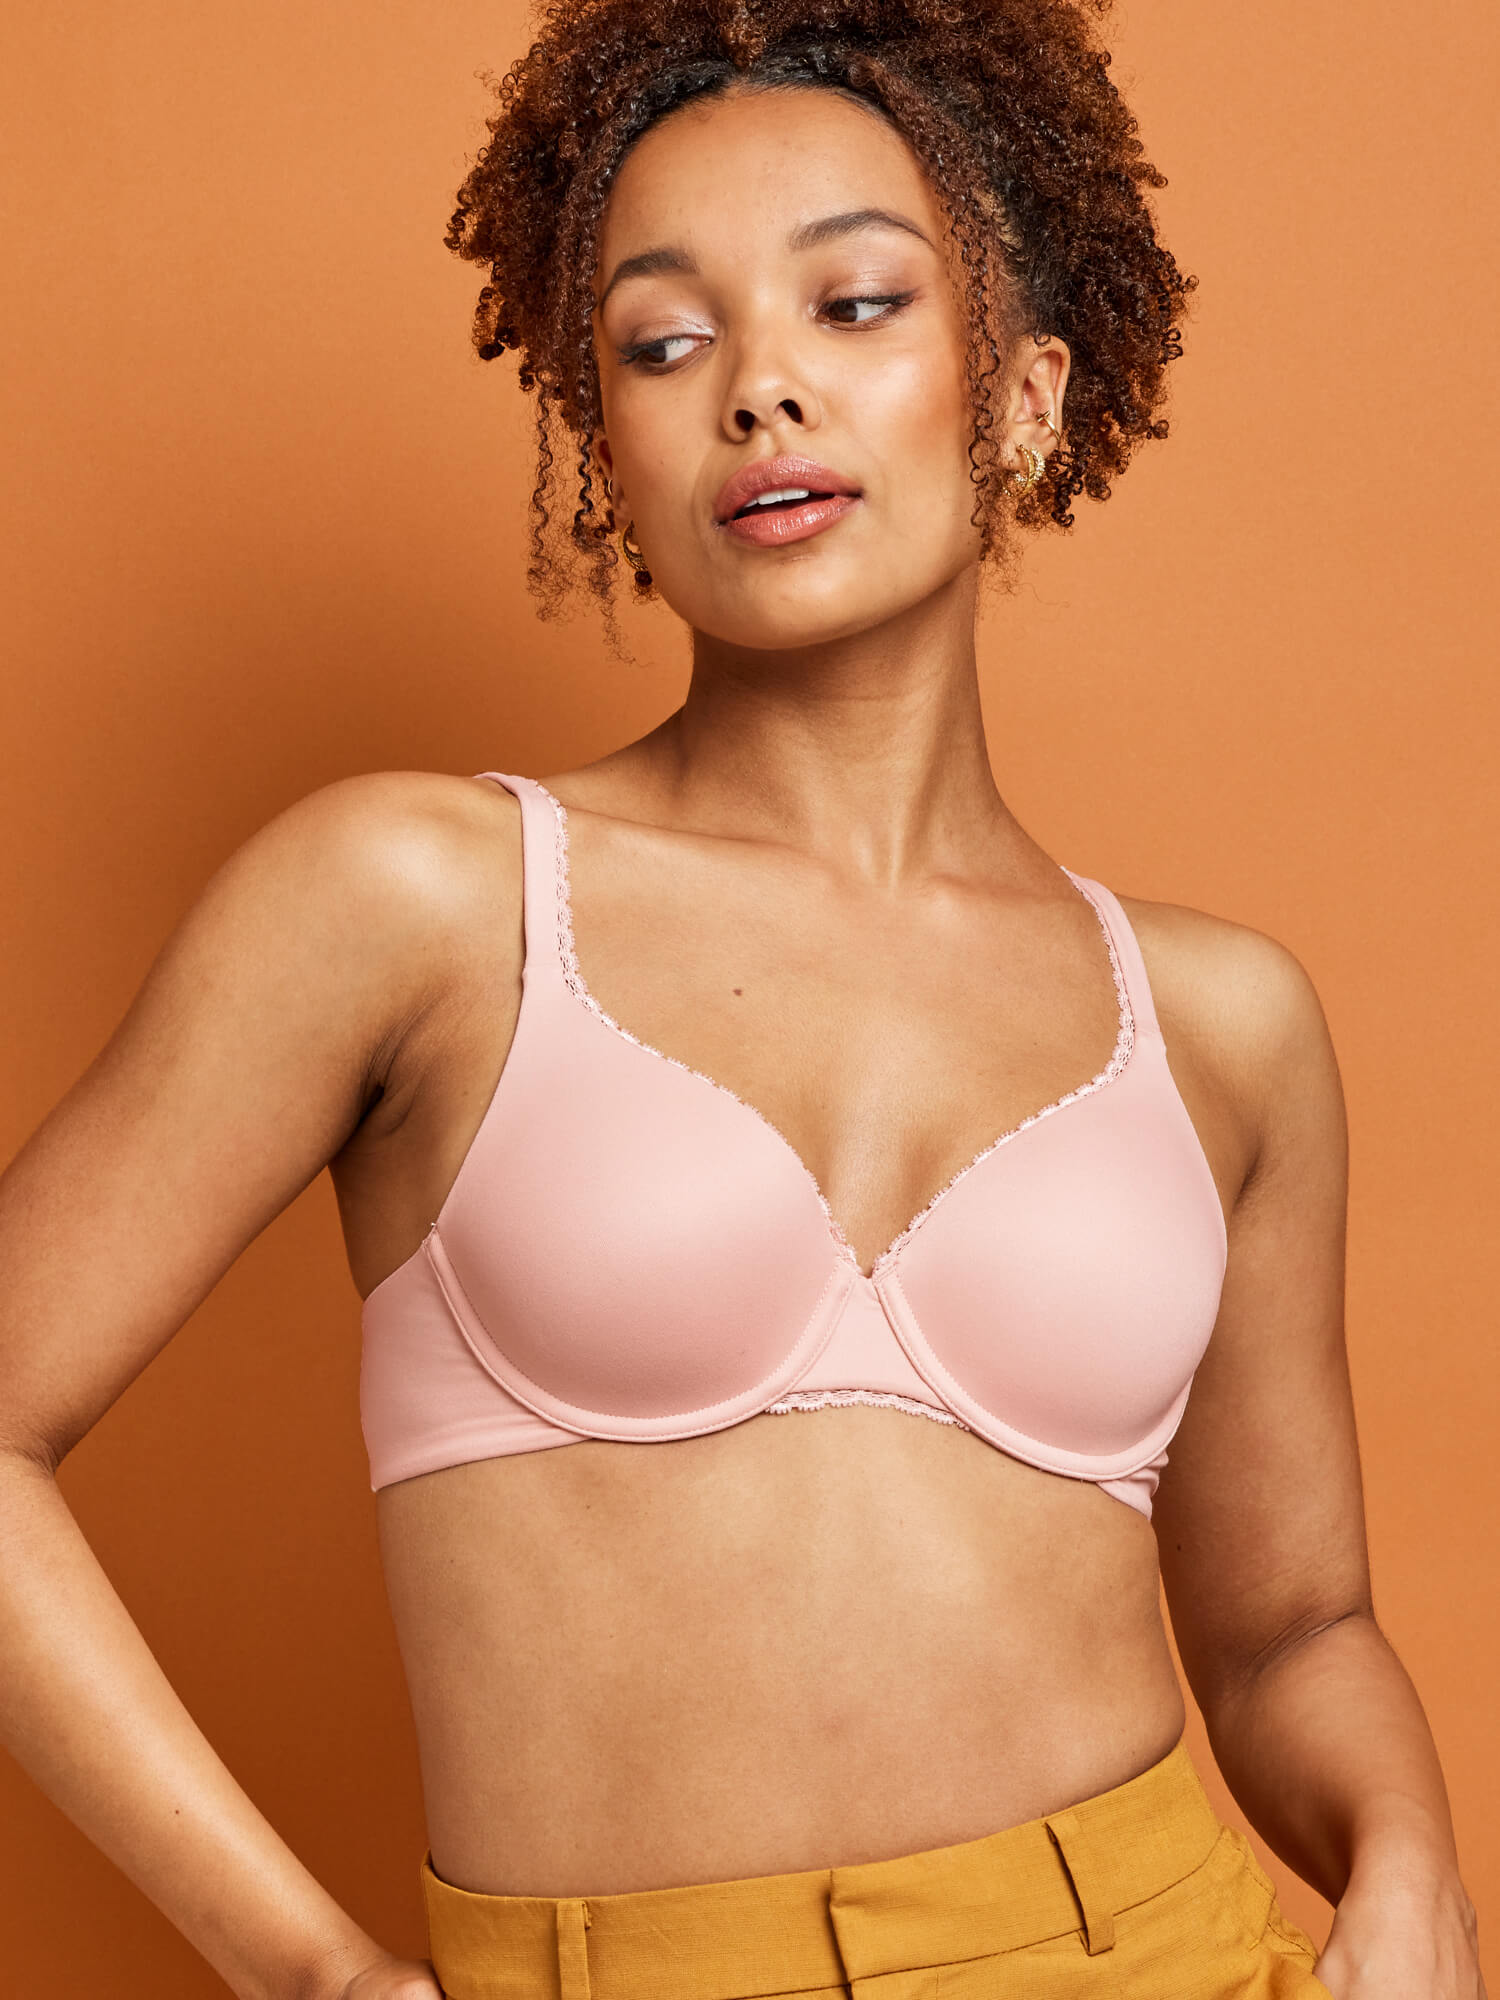 Kmart Wirefre Smooth T-Shirt Bra-Woodrose Size: 14C